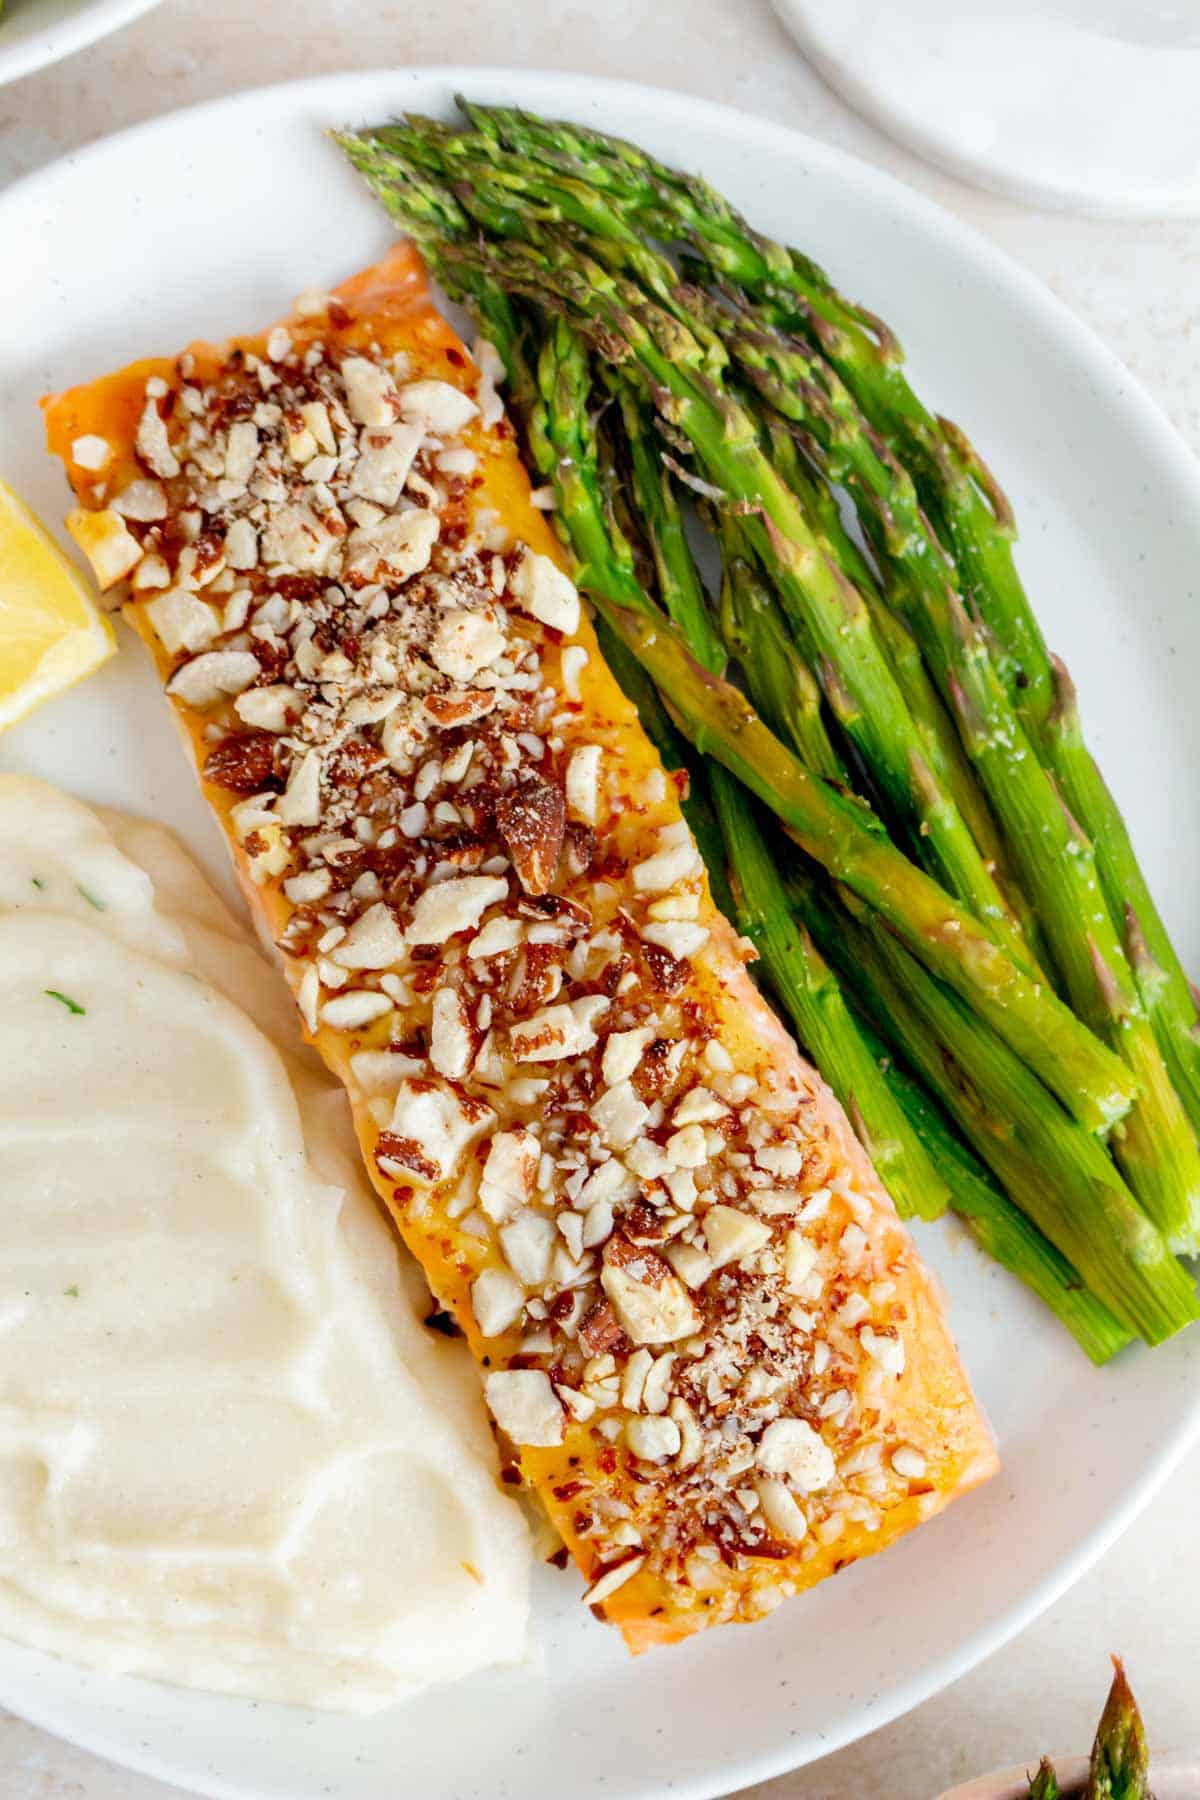 A close view of a plate with almond crusted salmon, asparagus, mashed potatoes, and a lemon wedge.